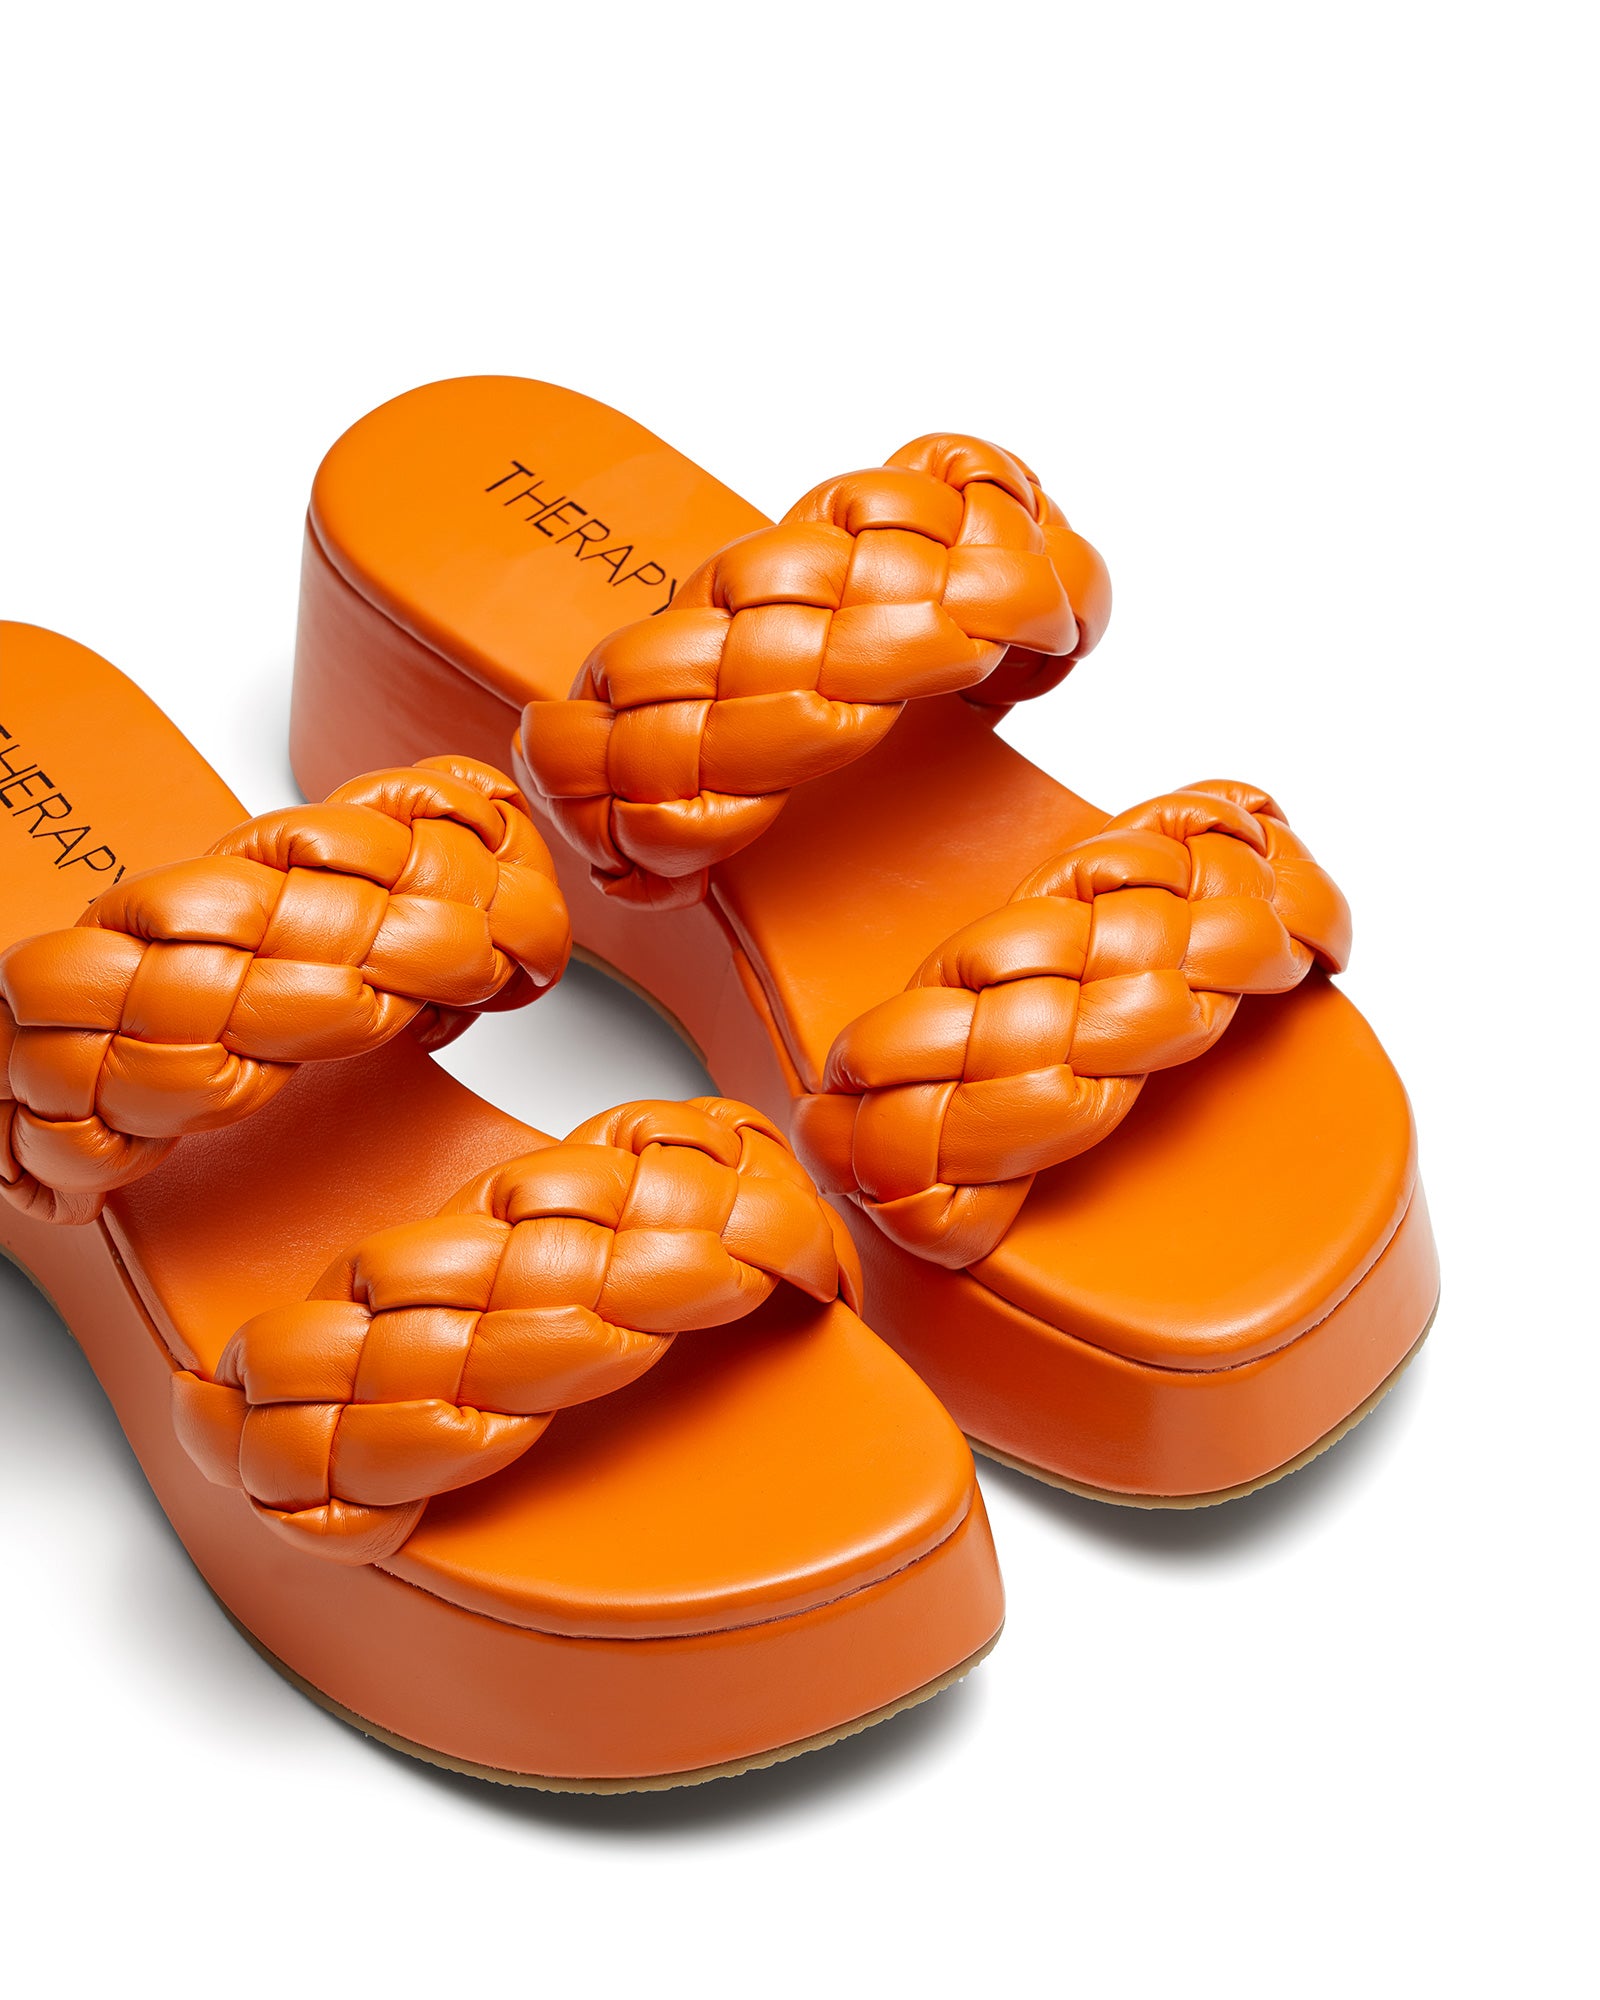 Therapy Shoes Christy Tangerine | Women's Sandals | Slides | Platform | Woven